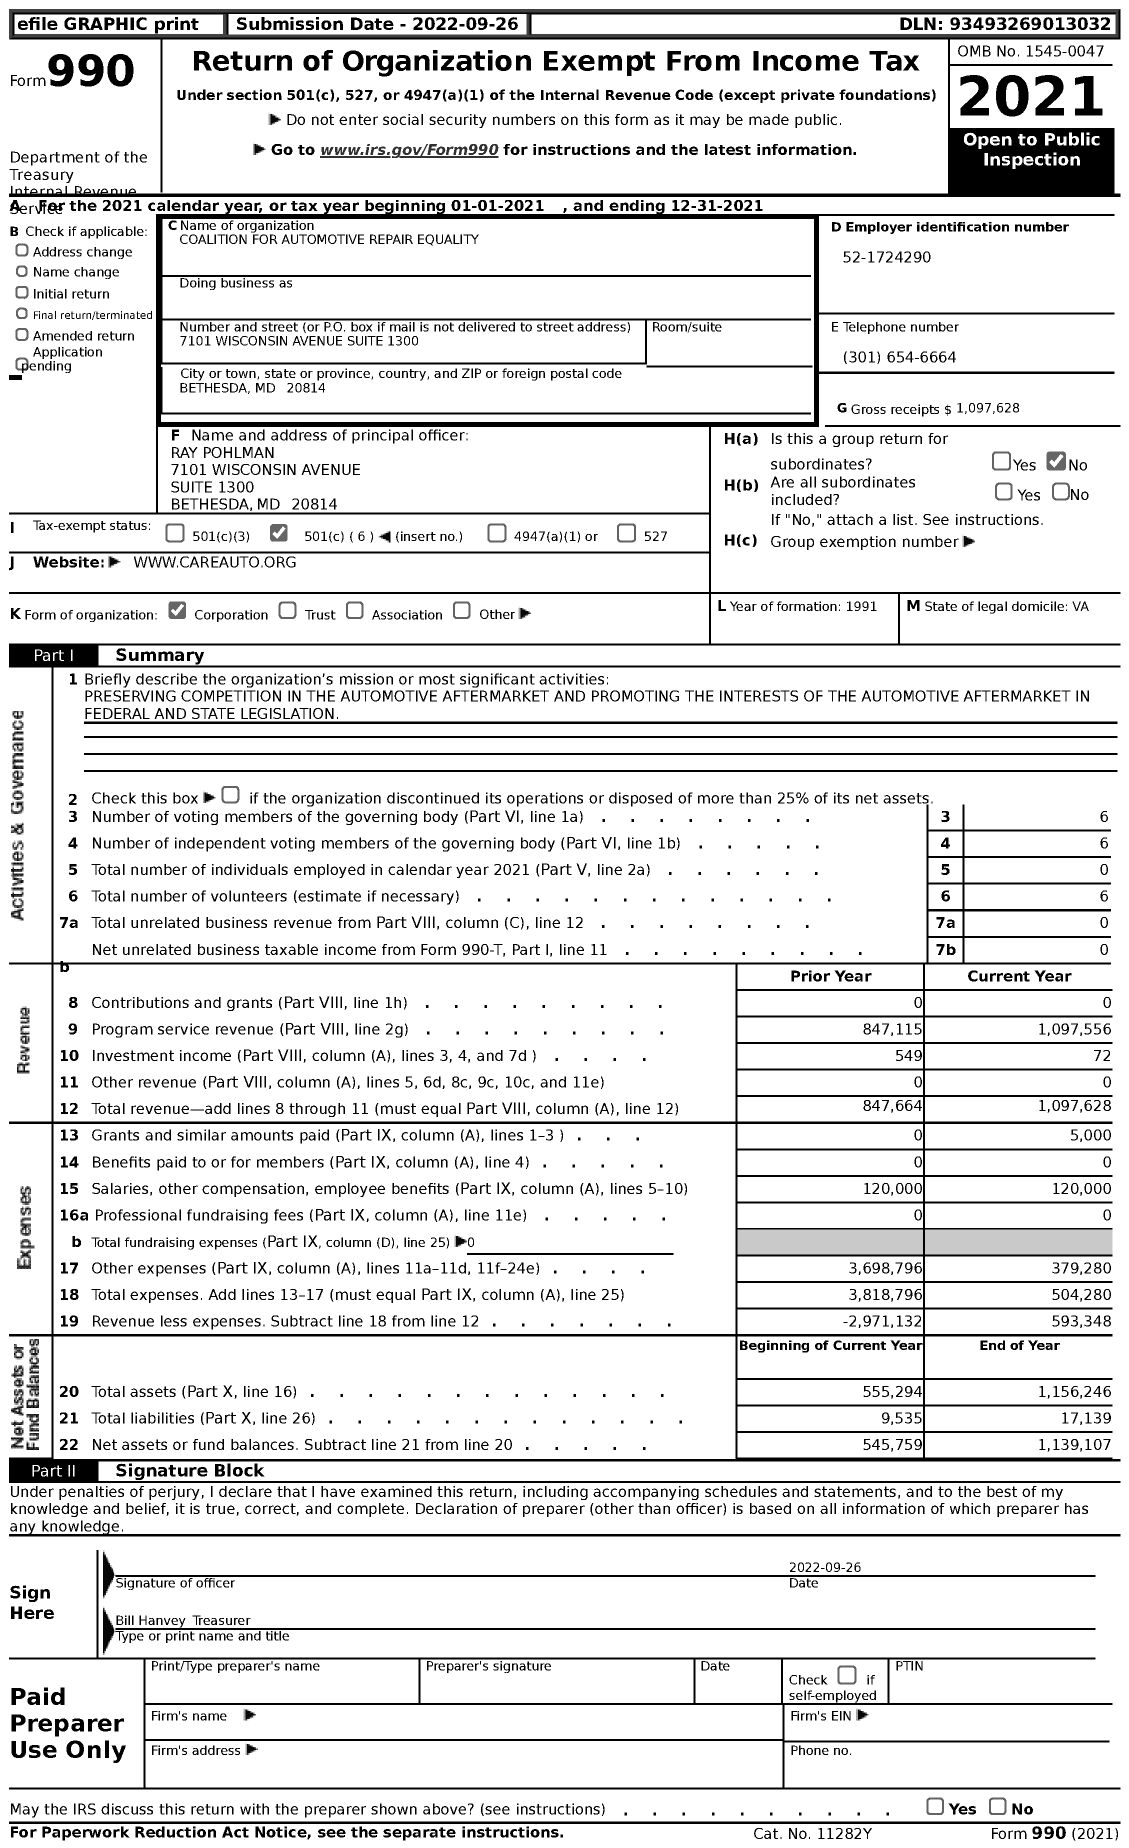 Image of first page of 2021 Form 990 for Coalition for Automotive Repair Equality (CARE)